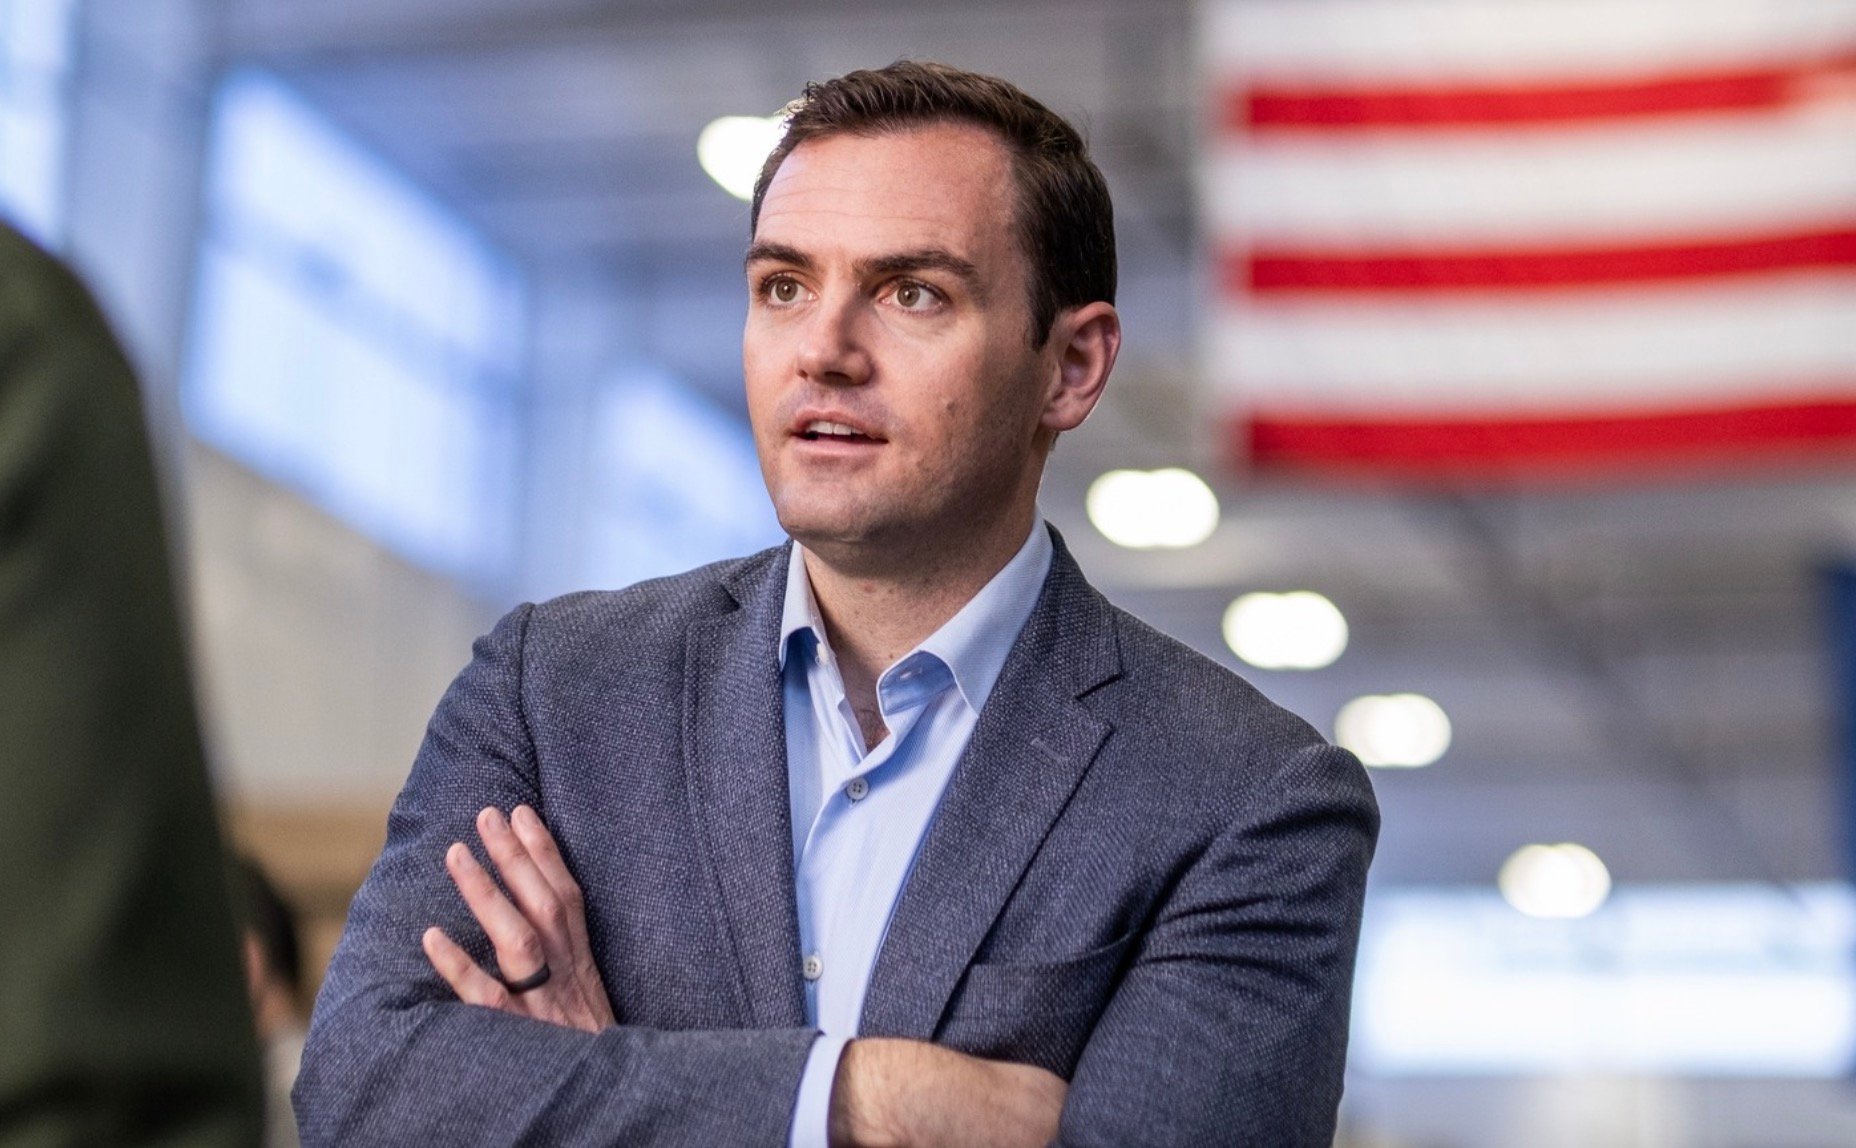 JUST IN: RINO Rep. Mike Gallagher Who Voted Against Impeaching Mayorkas Announces He Will Not Seek Reelection